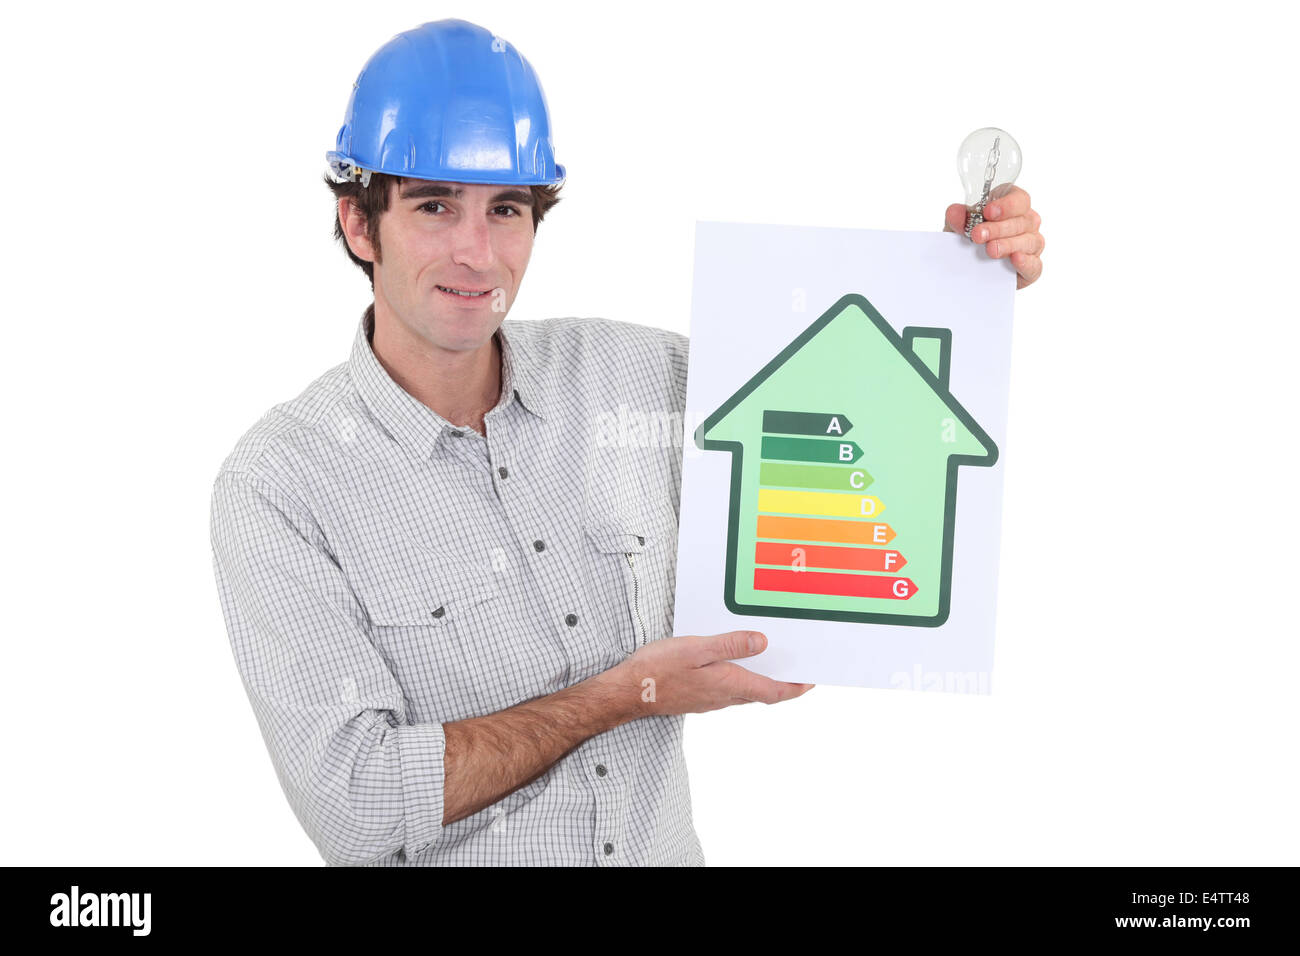 Constructor holding energy rating sign Stock Photo